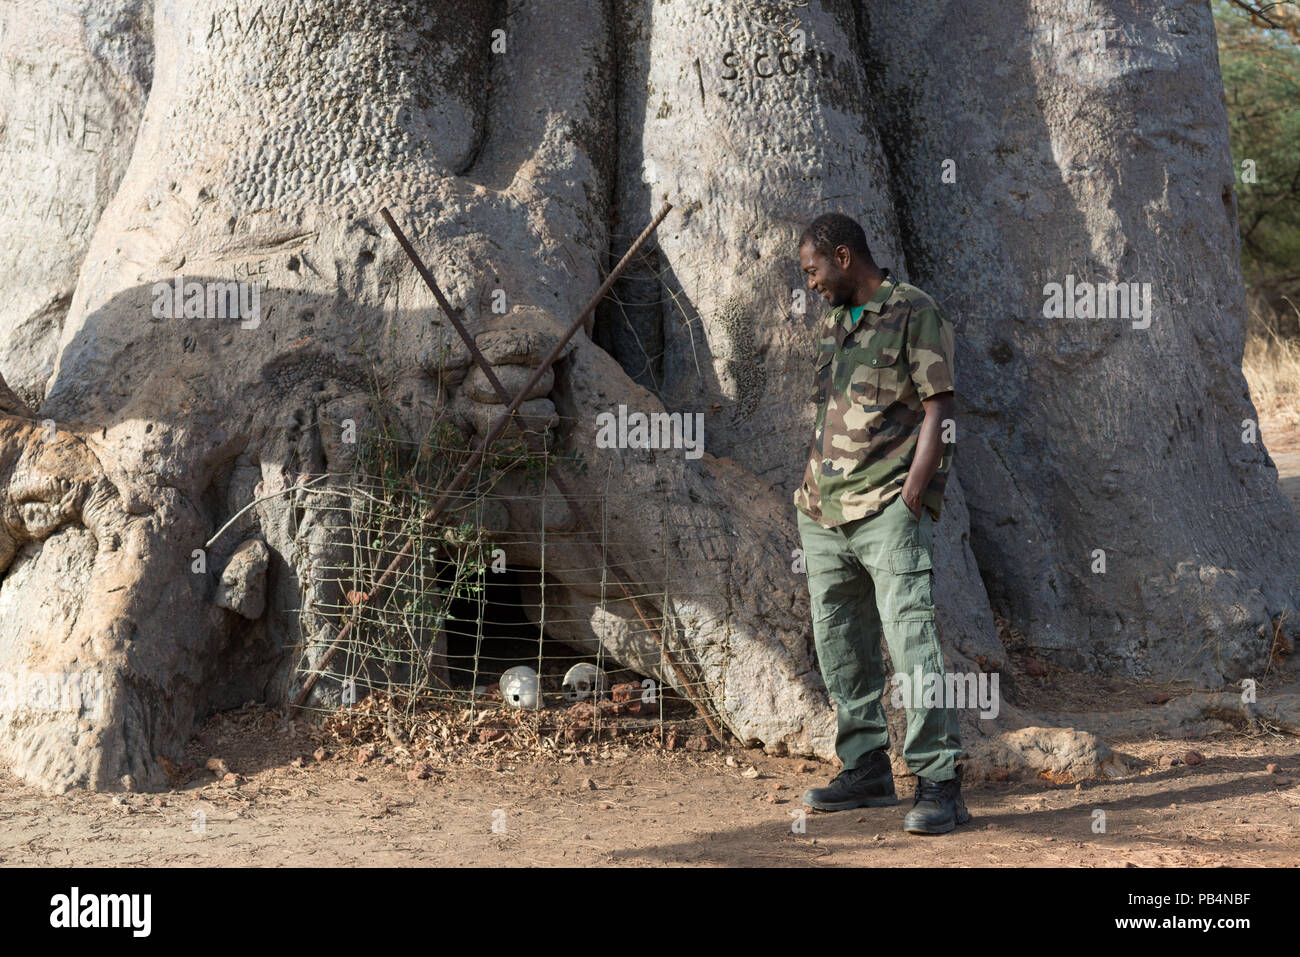 A ranger at Bandia Wildlife Reserve looking at the skulls at the foot of the baobab tree, Senegal, West Africa Stock Photo